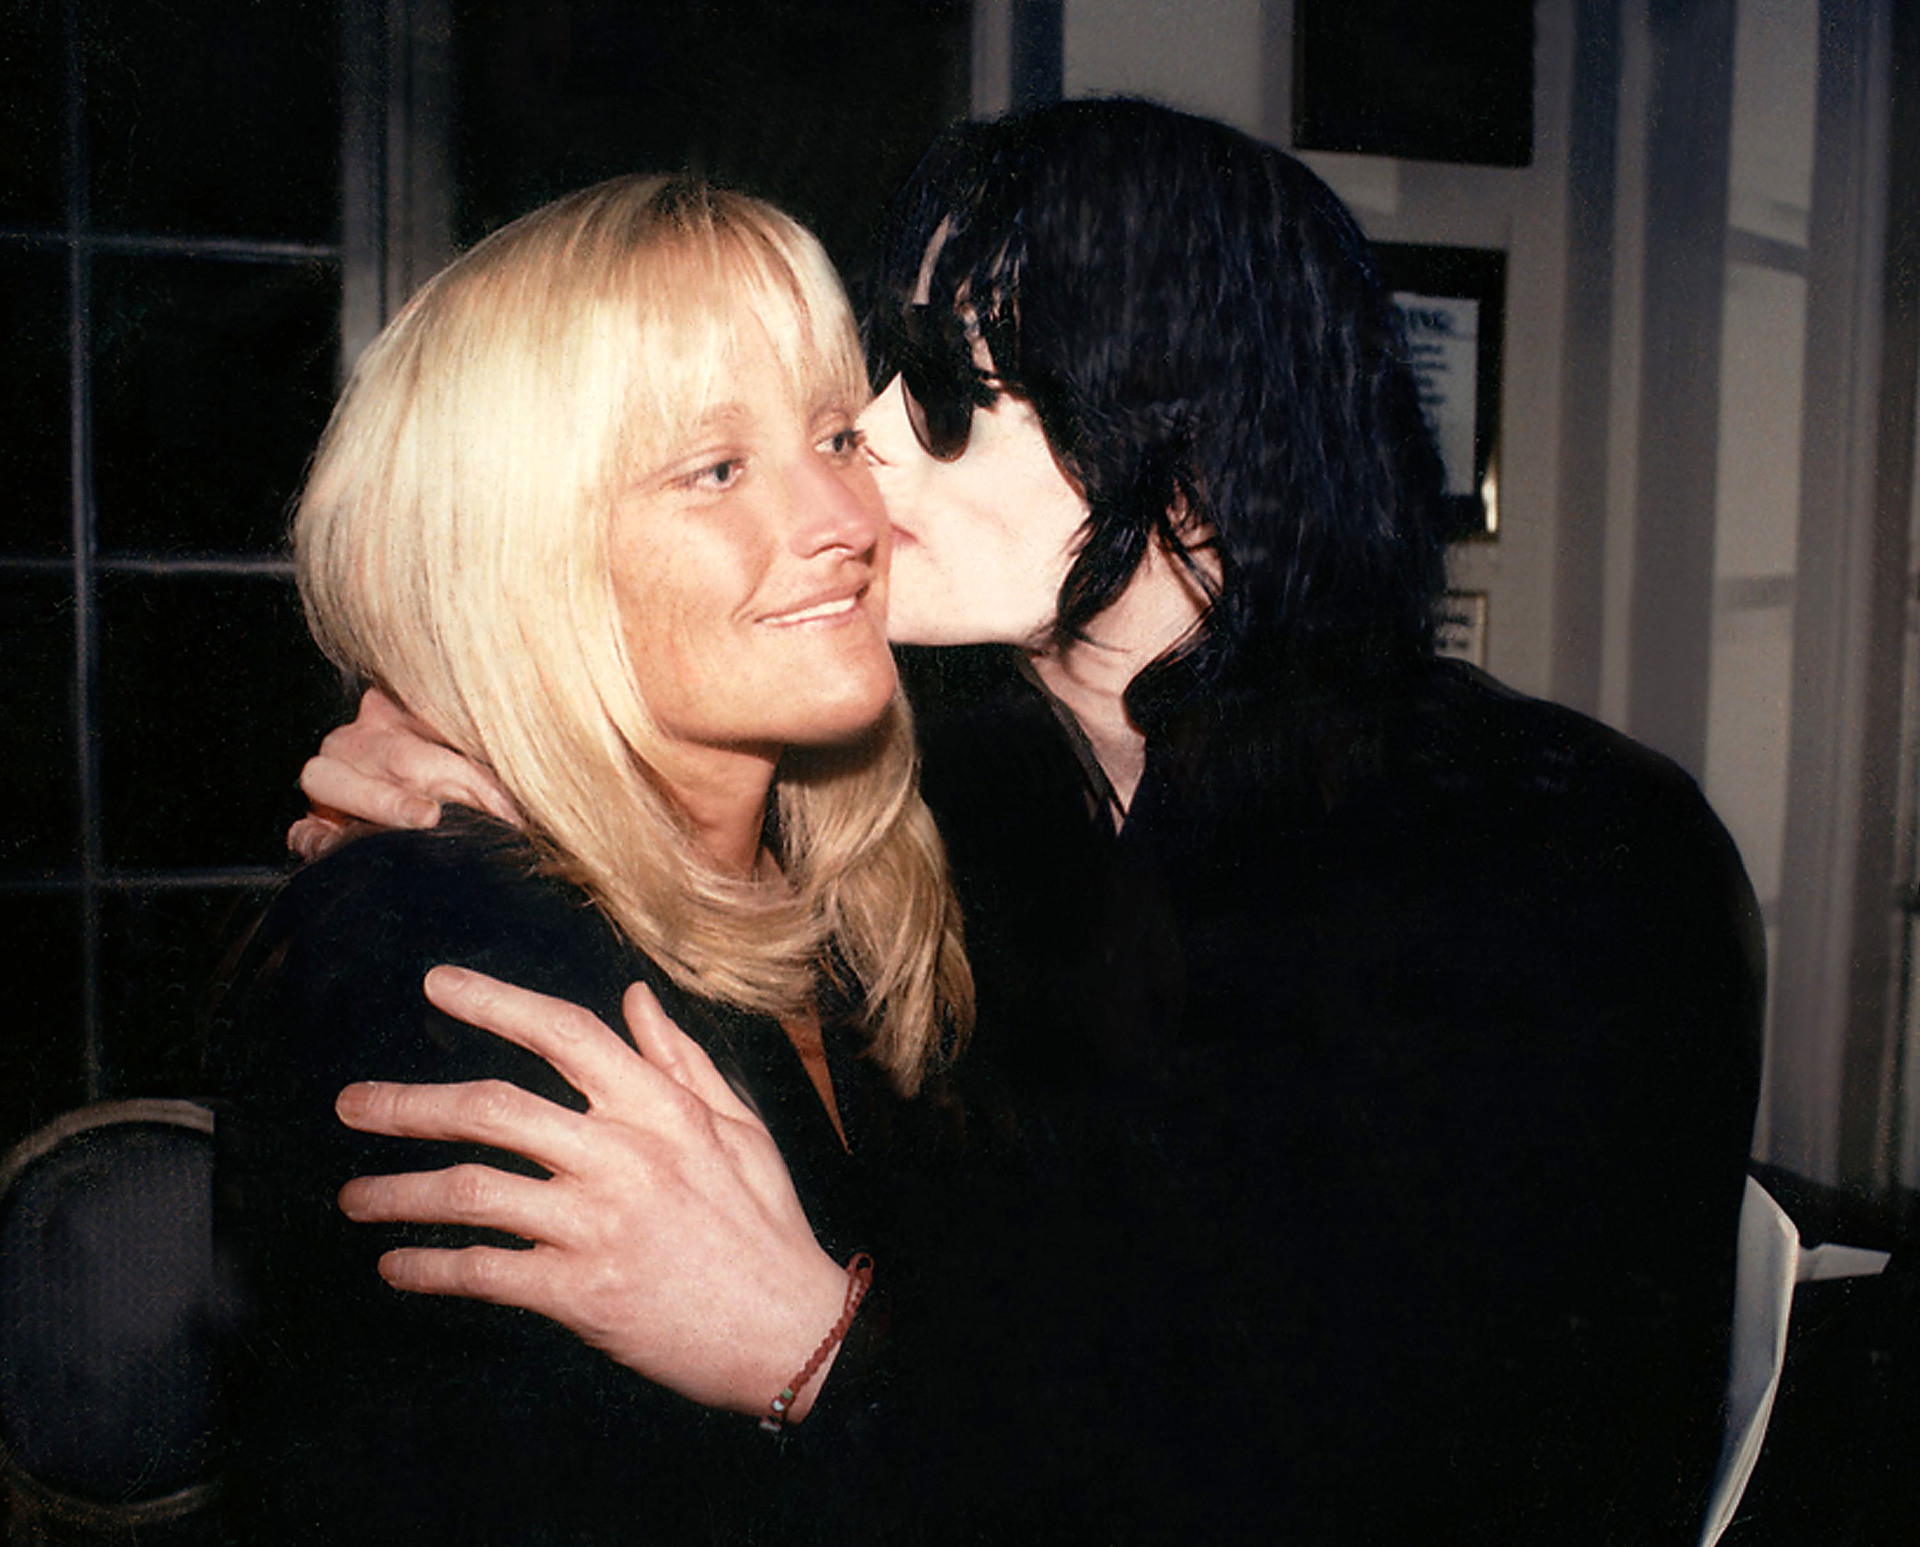 Michael Jackson's former wife Debbie Rowe hints she was partly to blame for his death - NZ Herald